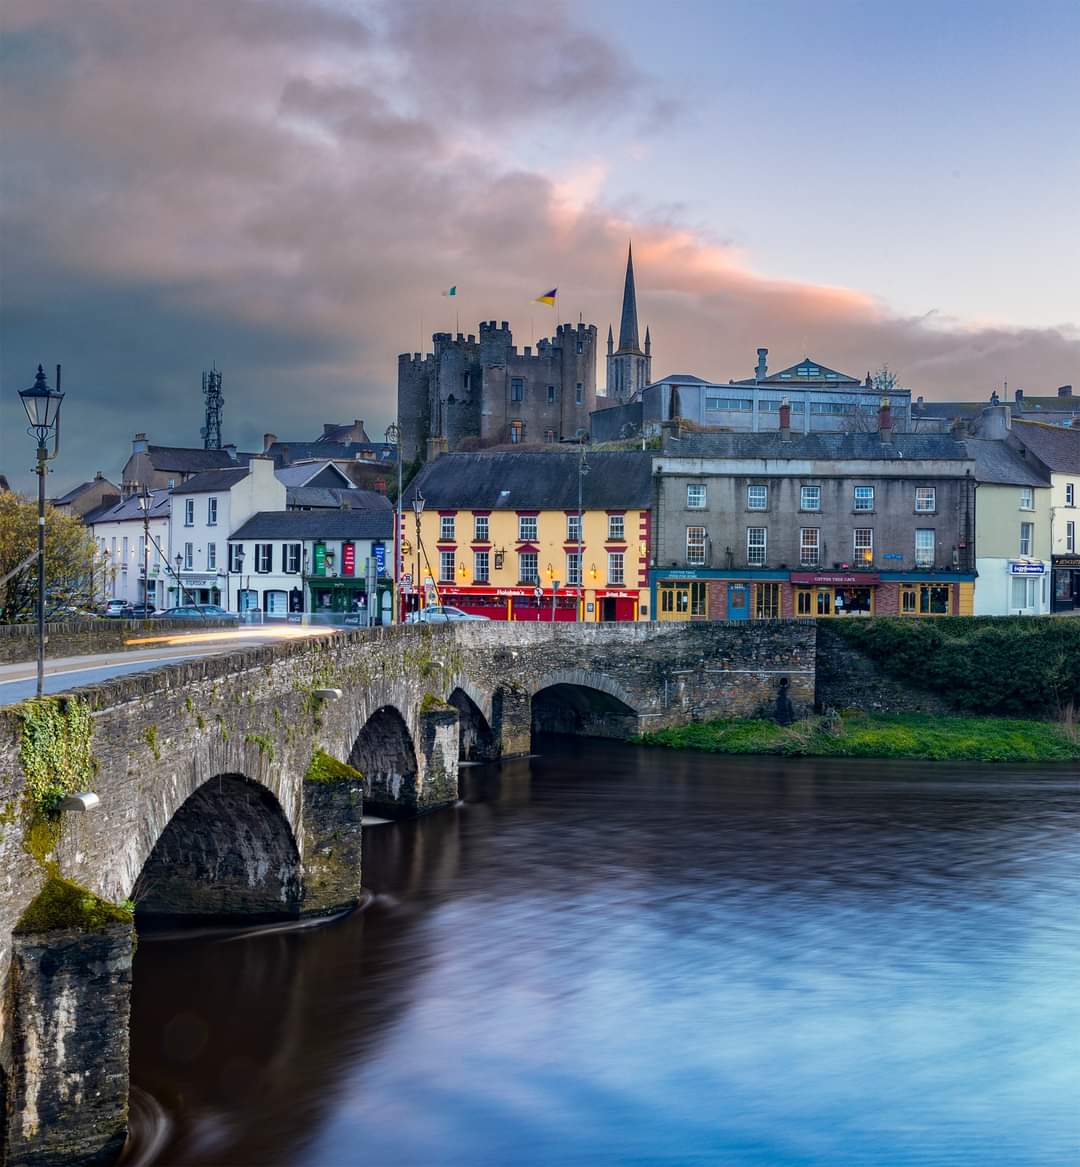 🏰The town of Enniscorthy - Understated allure and compelling charm. It also proudly served as the backdrop for 2015 movie, 'Brooklyn,' featuring the Saoirse Ronan. 🎥A poignant narrative that traces the journey of an Irish immigrant, whose love of Ireland never dwindled. ☘️